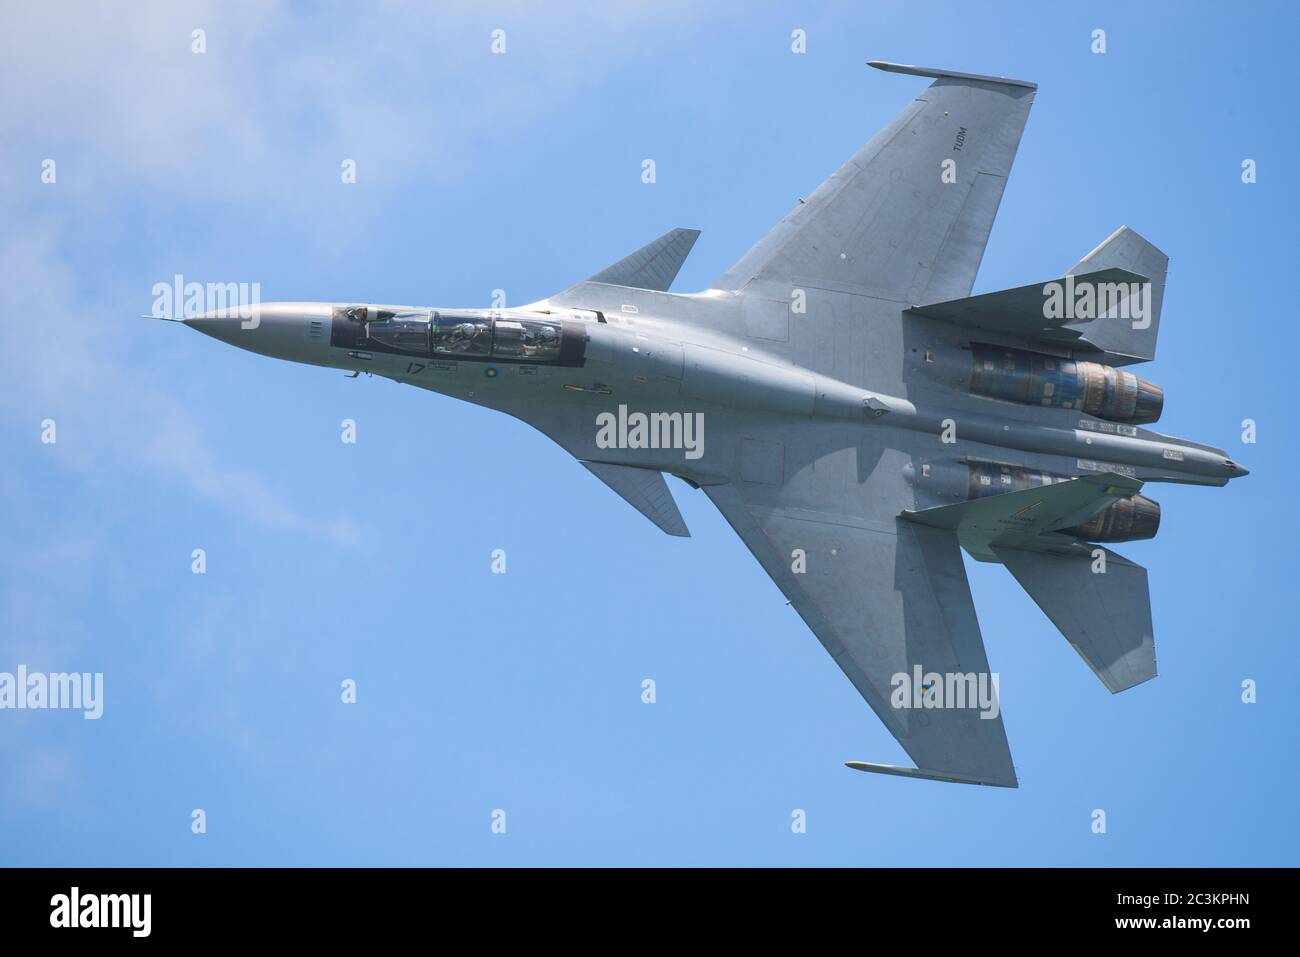 Singapore - February 16, 2016: Top view of Sukhoi Su‑30MKM from Royal Malaysian Air Force during it’s performance at Singapore Airshow at Changi Exhib Stock Photo